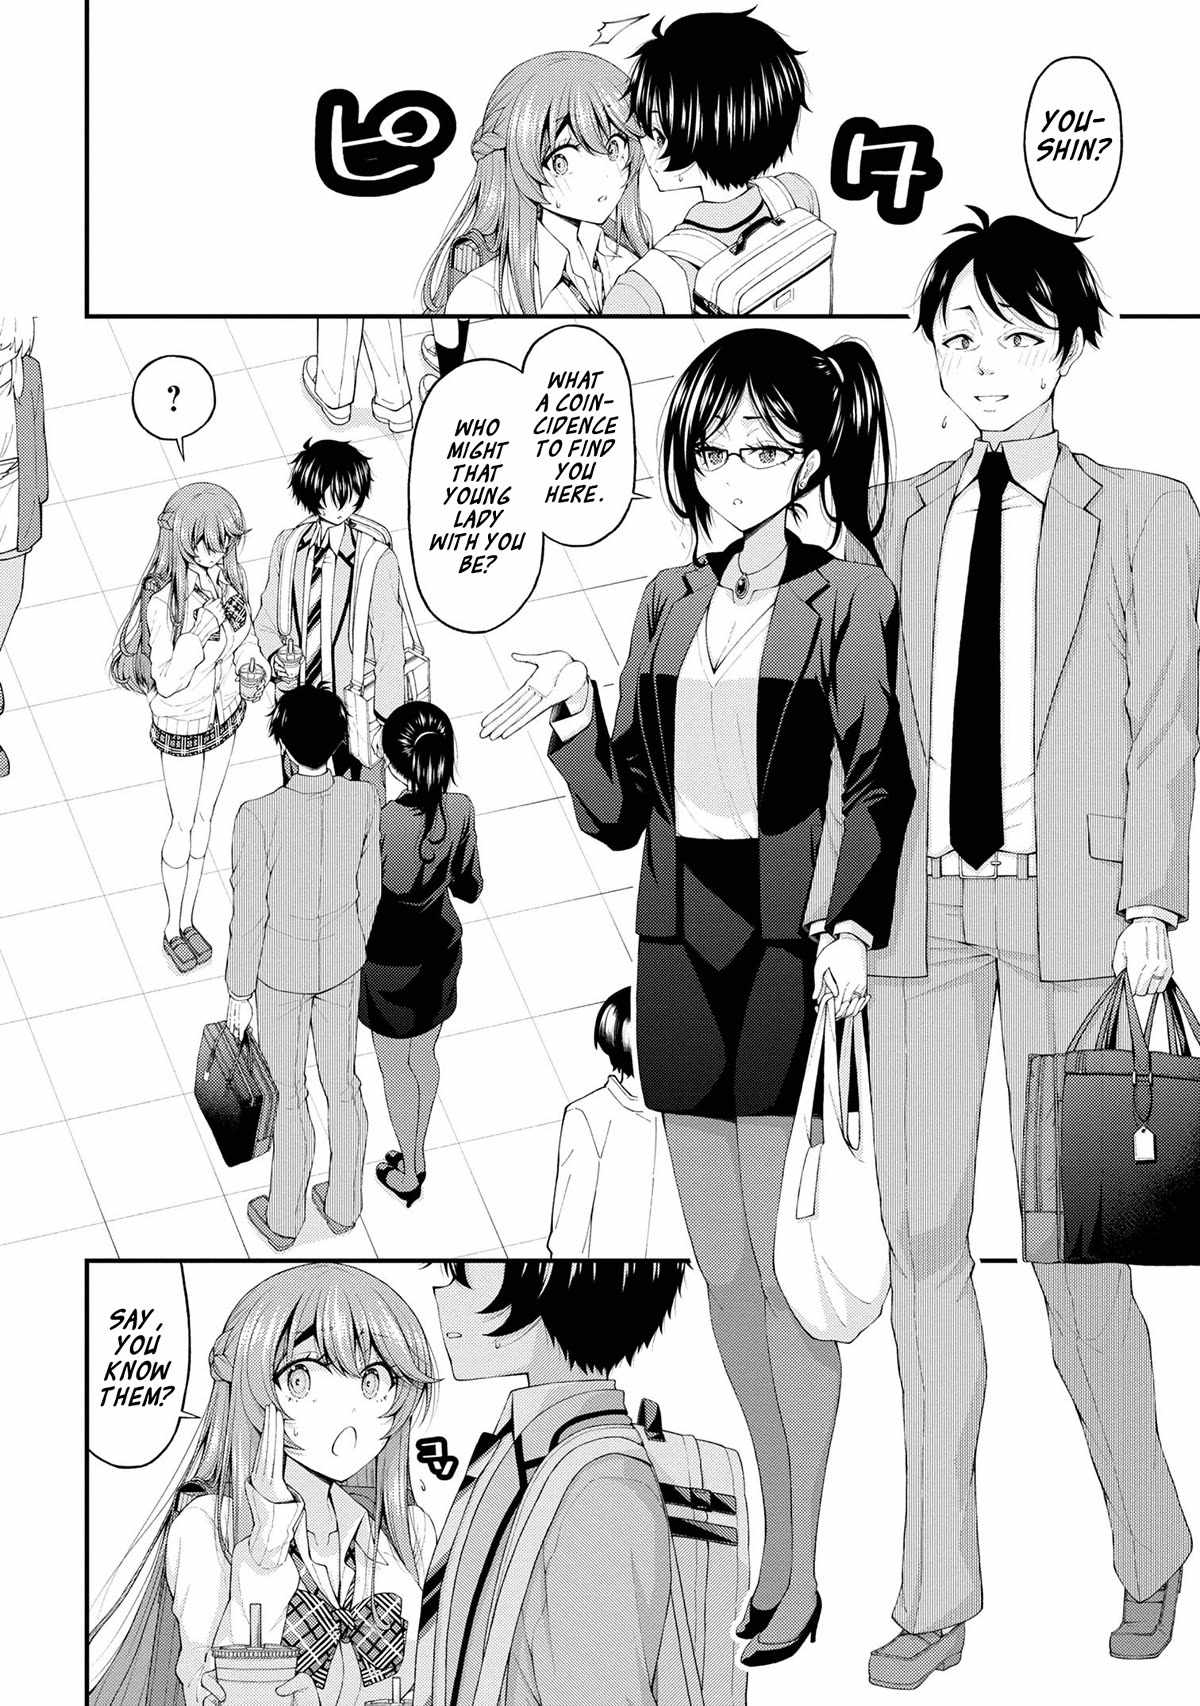 The Gal Who Was Meant to Confess to Me as a Game Punishment Has Apparently Fallen in Love with Me Chapter 14-eng-li - Page 11